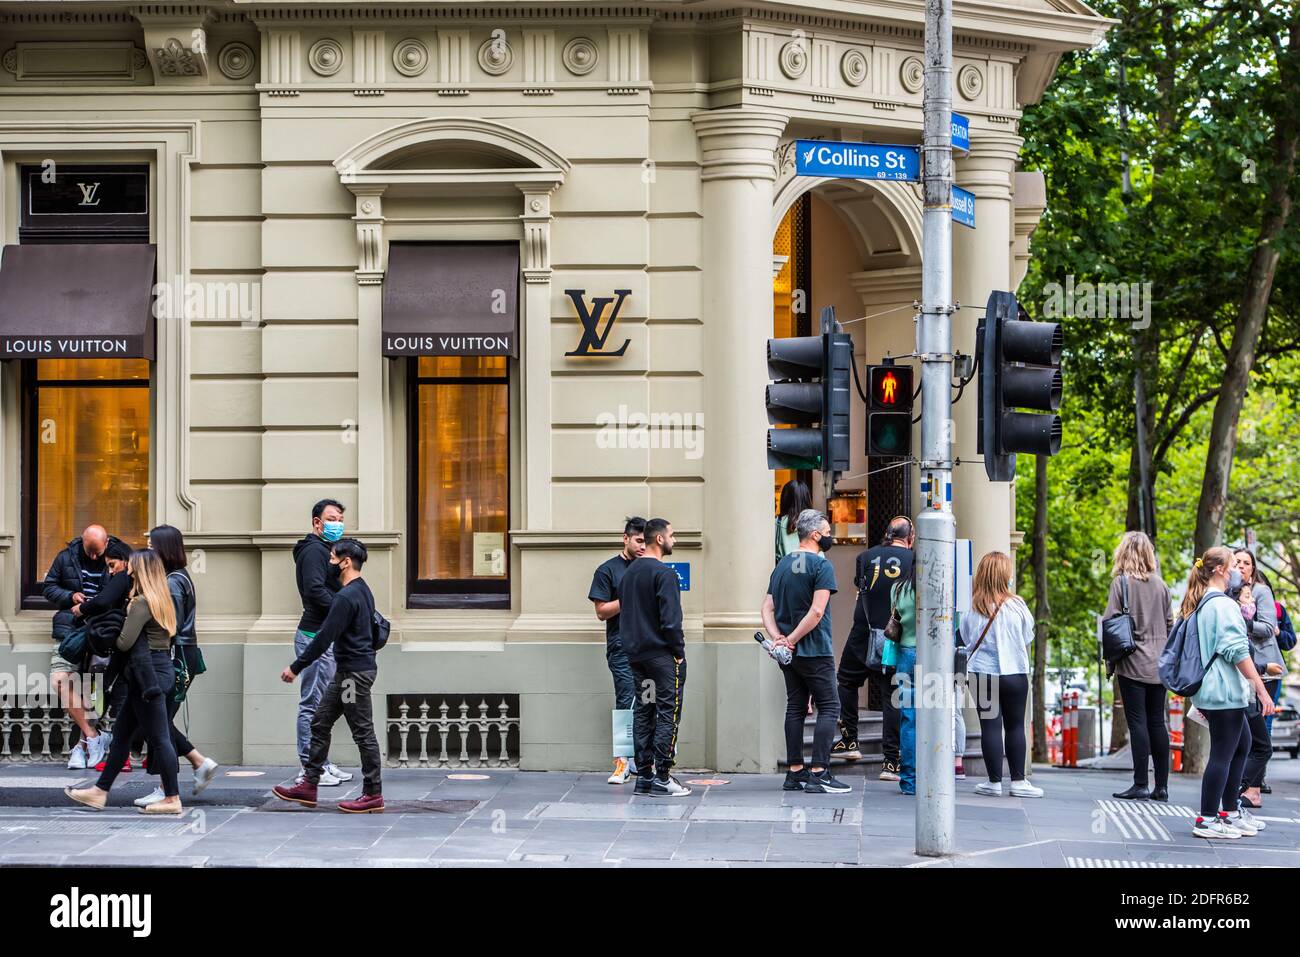 People seen lining up outside Louis Vuitton store in the rain on